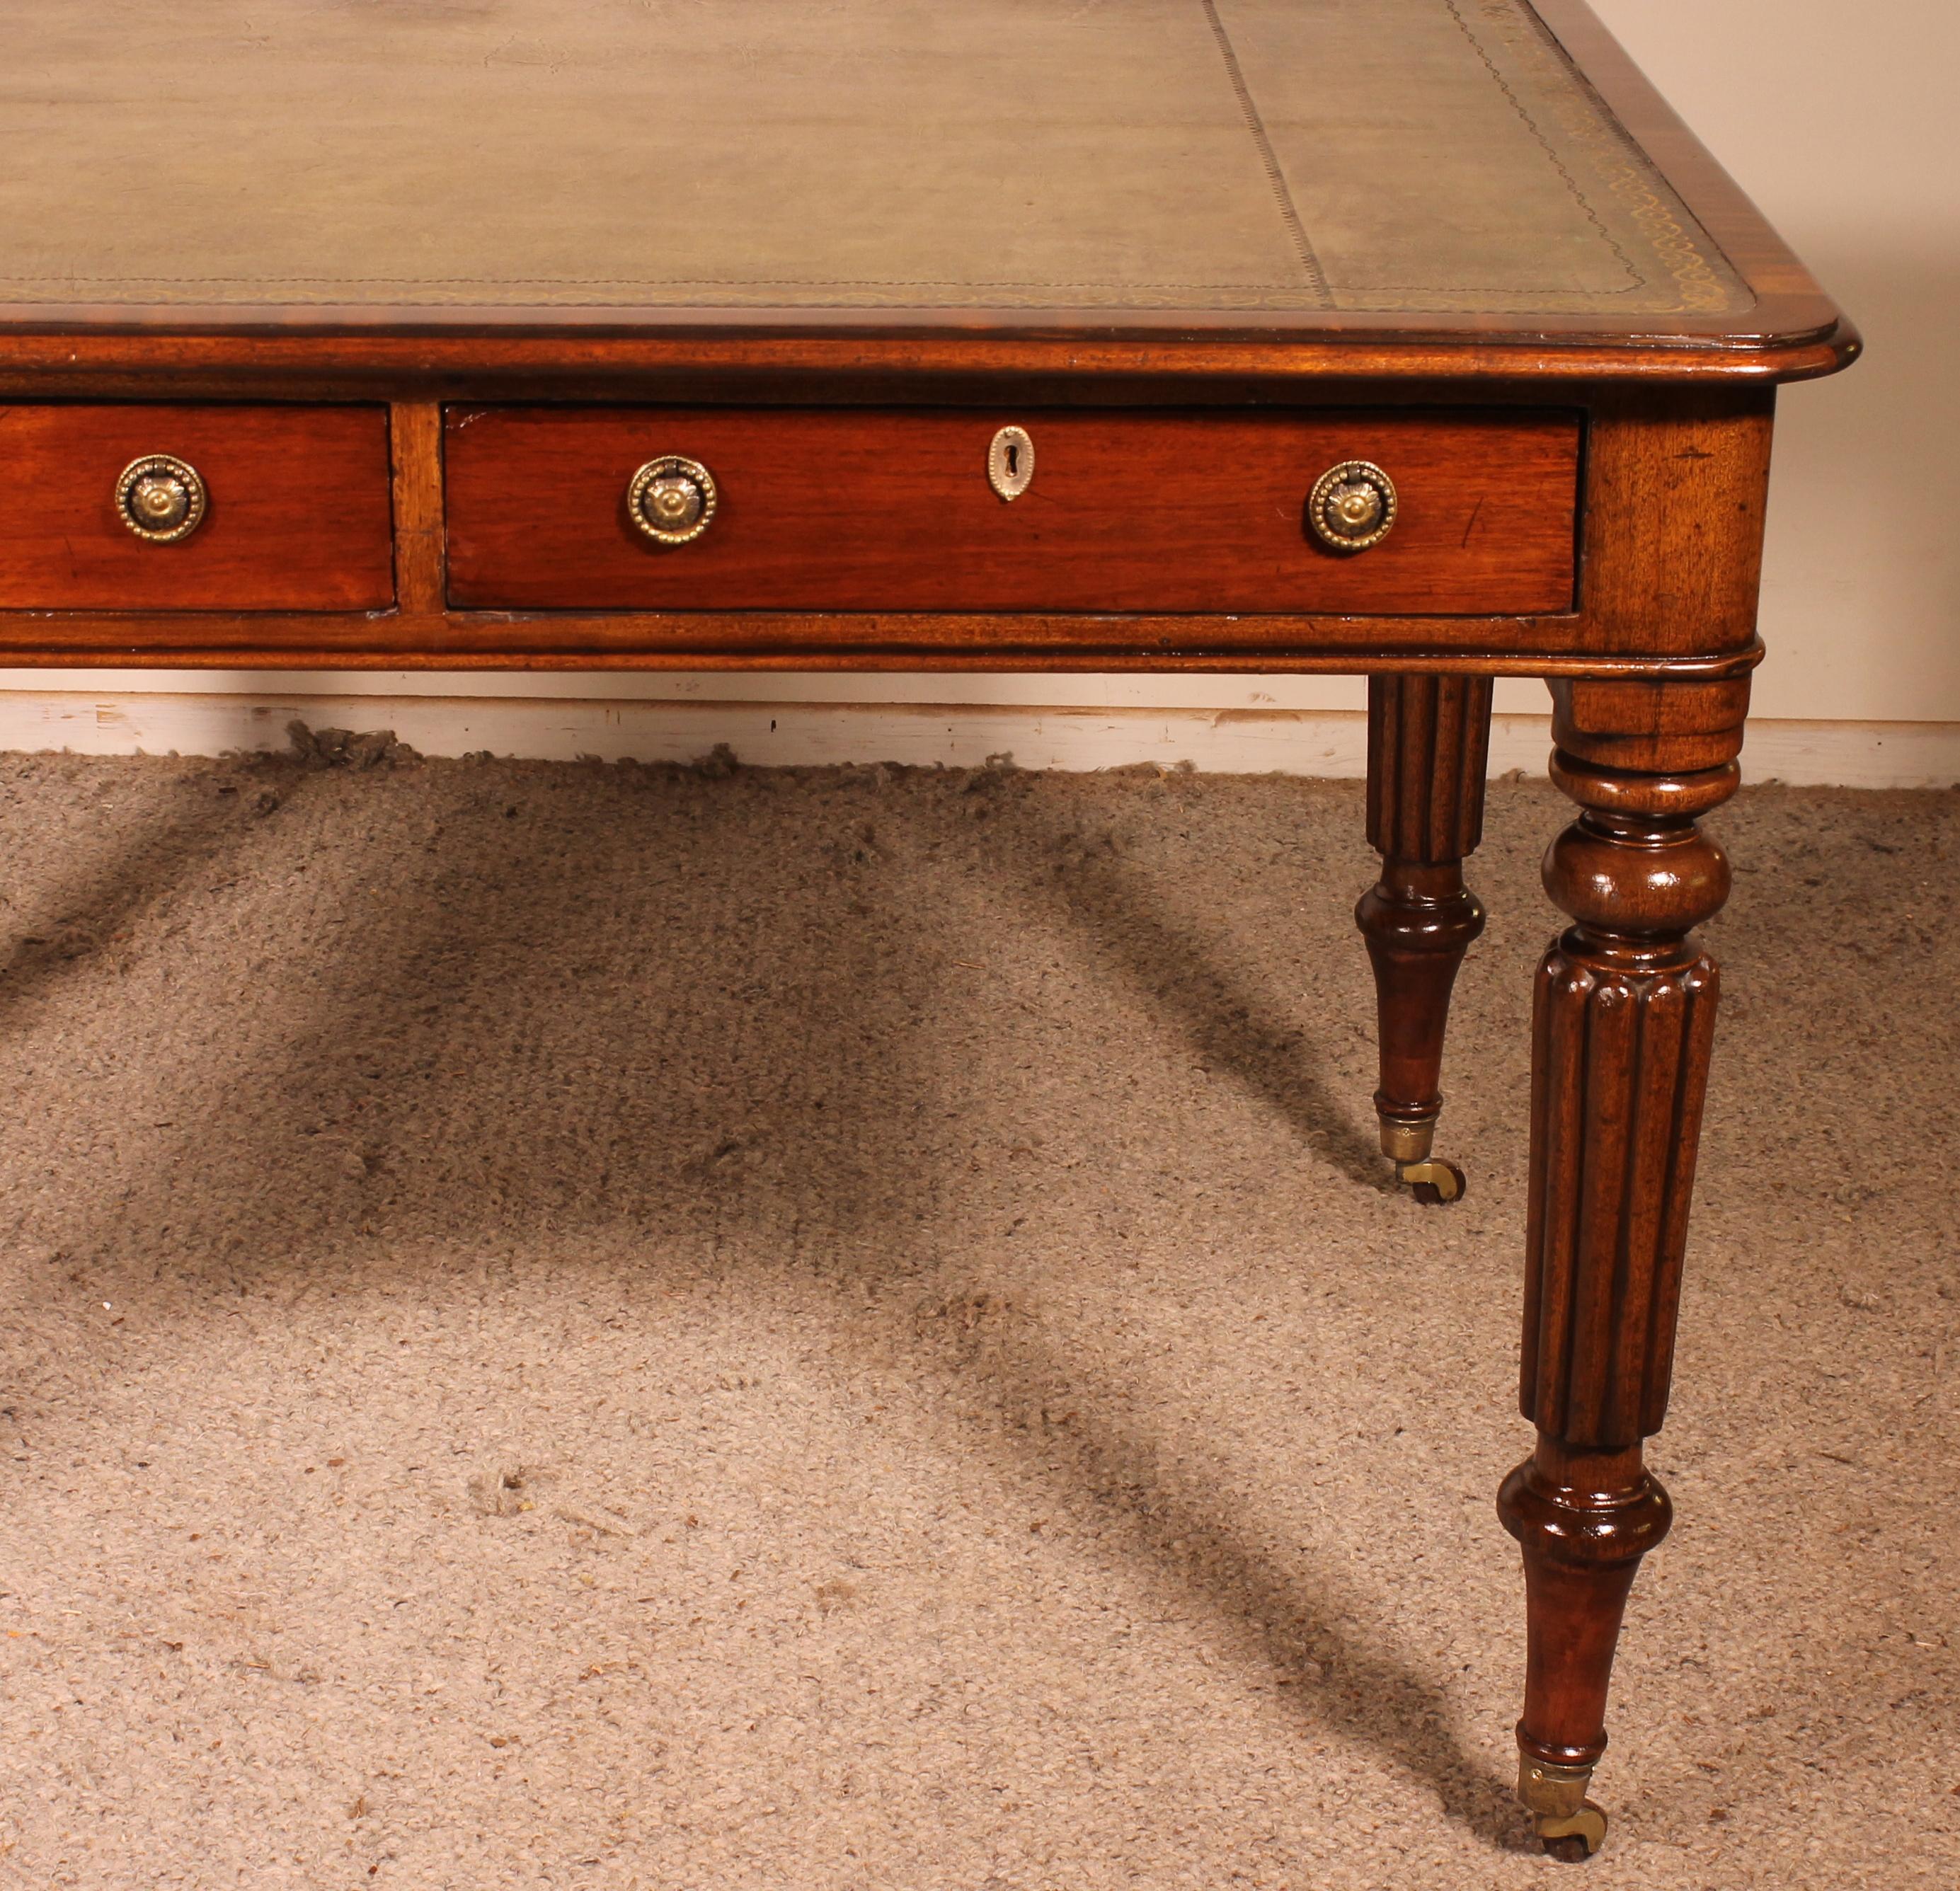 Superb writing desk from the 19th century from English in mahogany.
Elegant partner desk which has two drawers in the belt on each of its sides. It is rare to find double-sided writing table.
The desk rests on a superb turned base ending with its